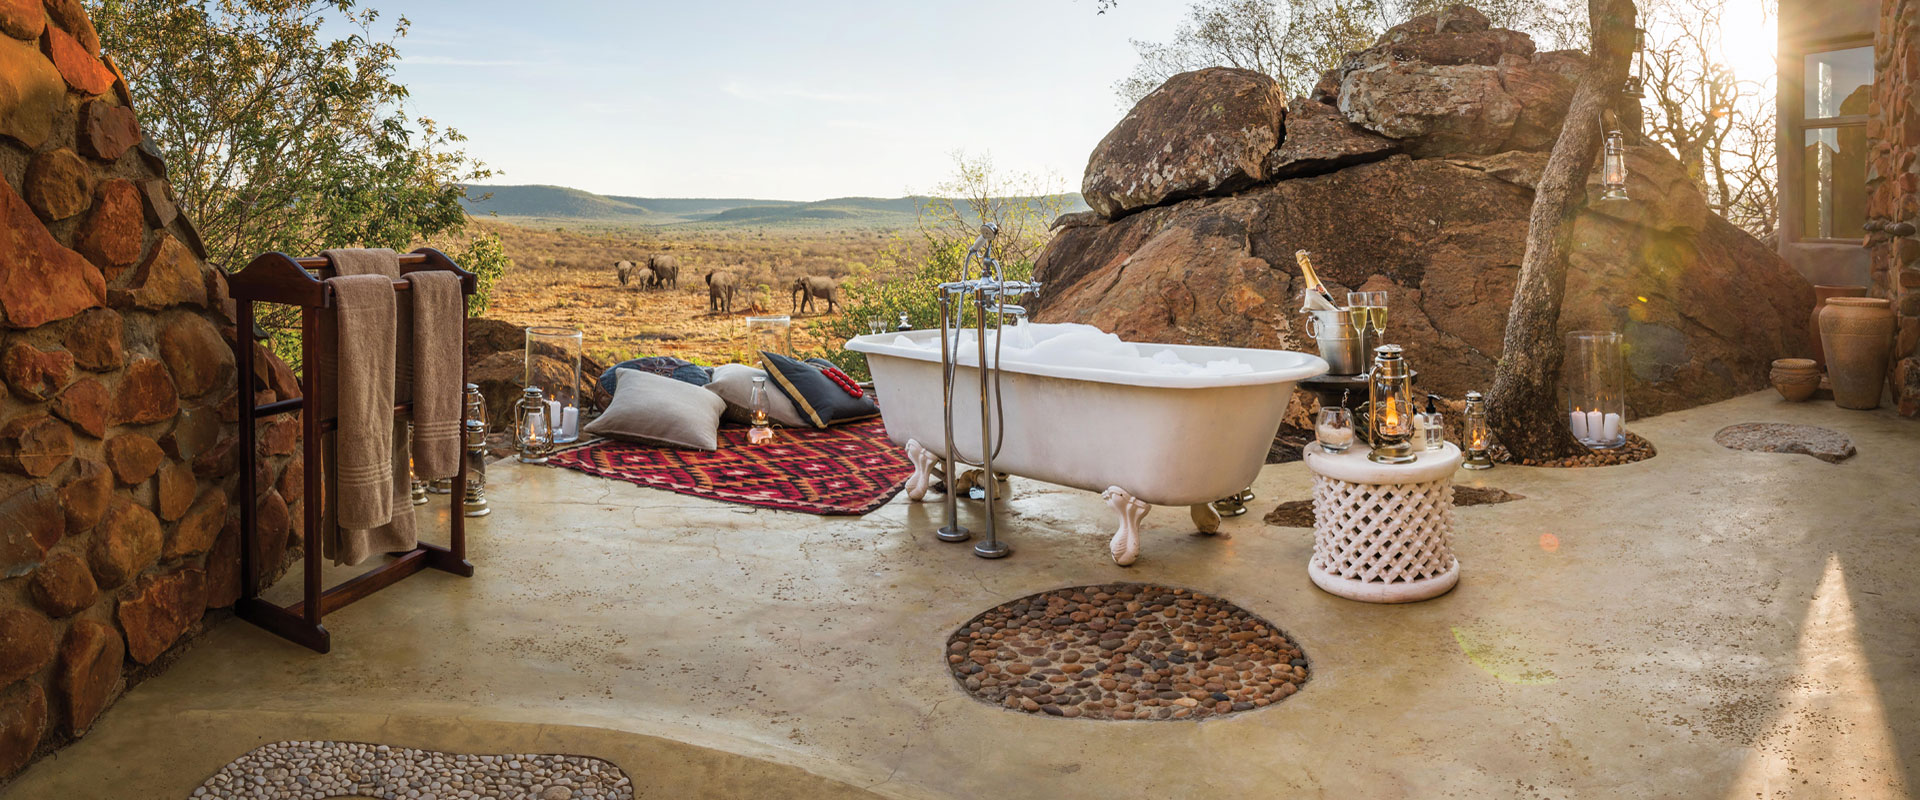 When We Can Travel: Luxury Safari Plans